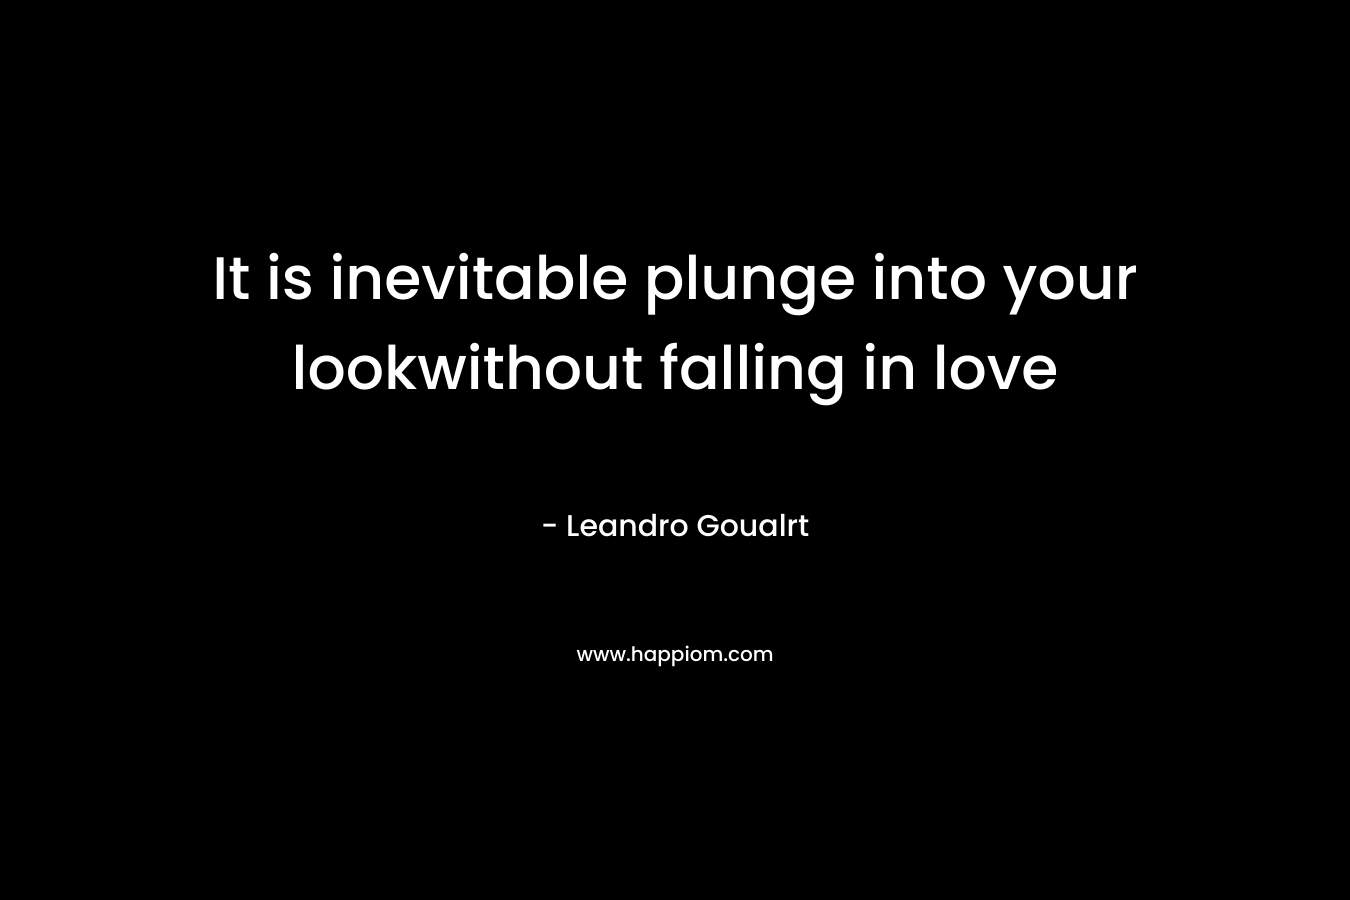 It is inevitable plunge into your lookwithout falling in love